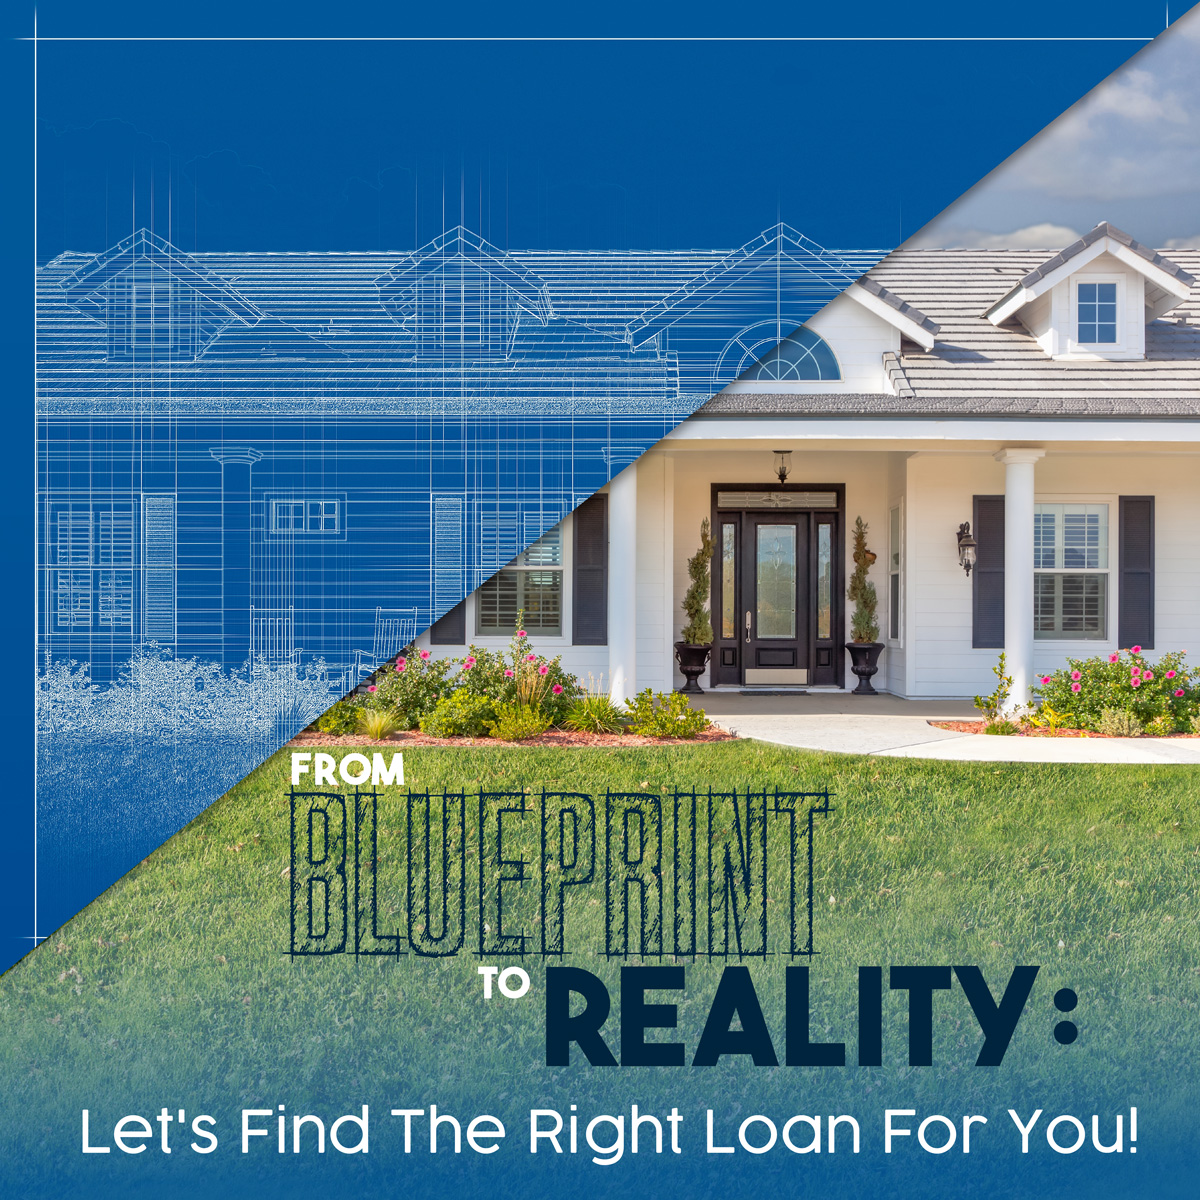 Looking for a new construction home? Don't limit yourself to your builder's lender. Let me help you explore all your options and achieve your dream home. Reach out today! #newconstruction #homebuying #realestateagent